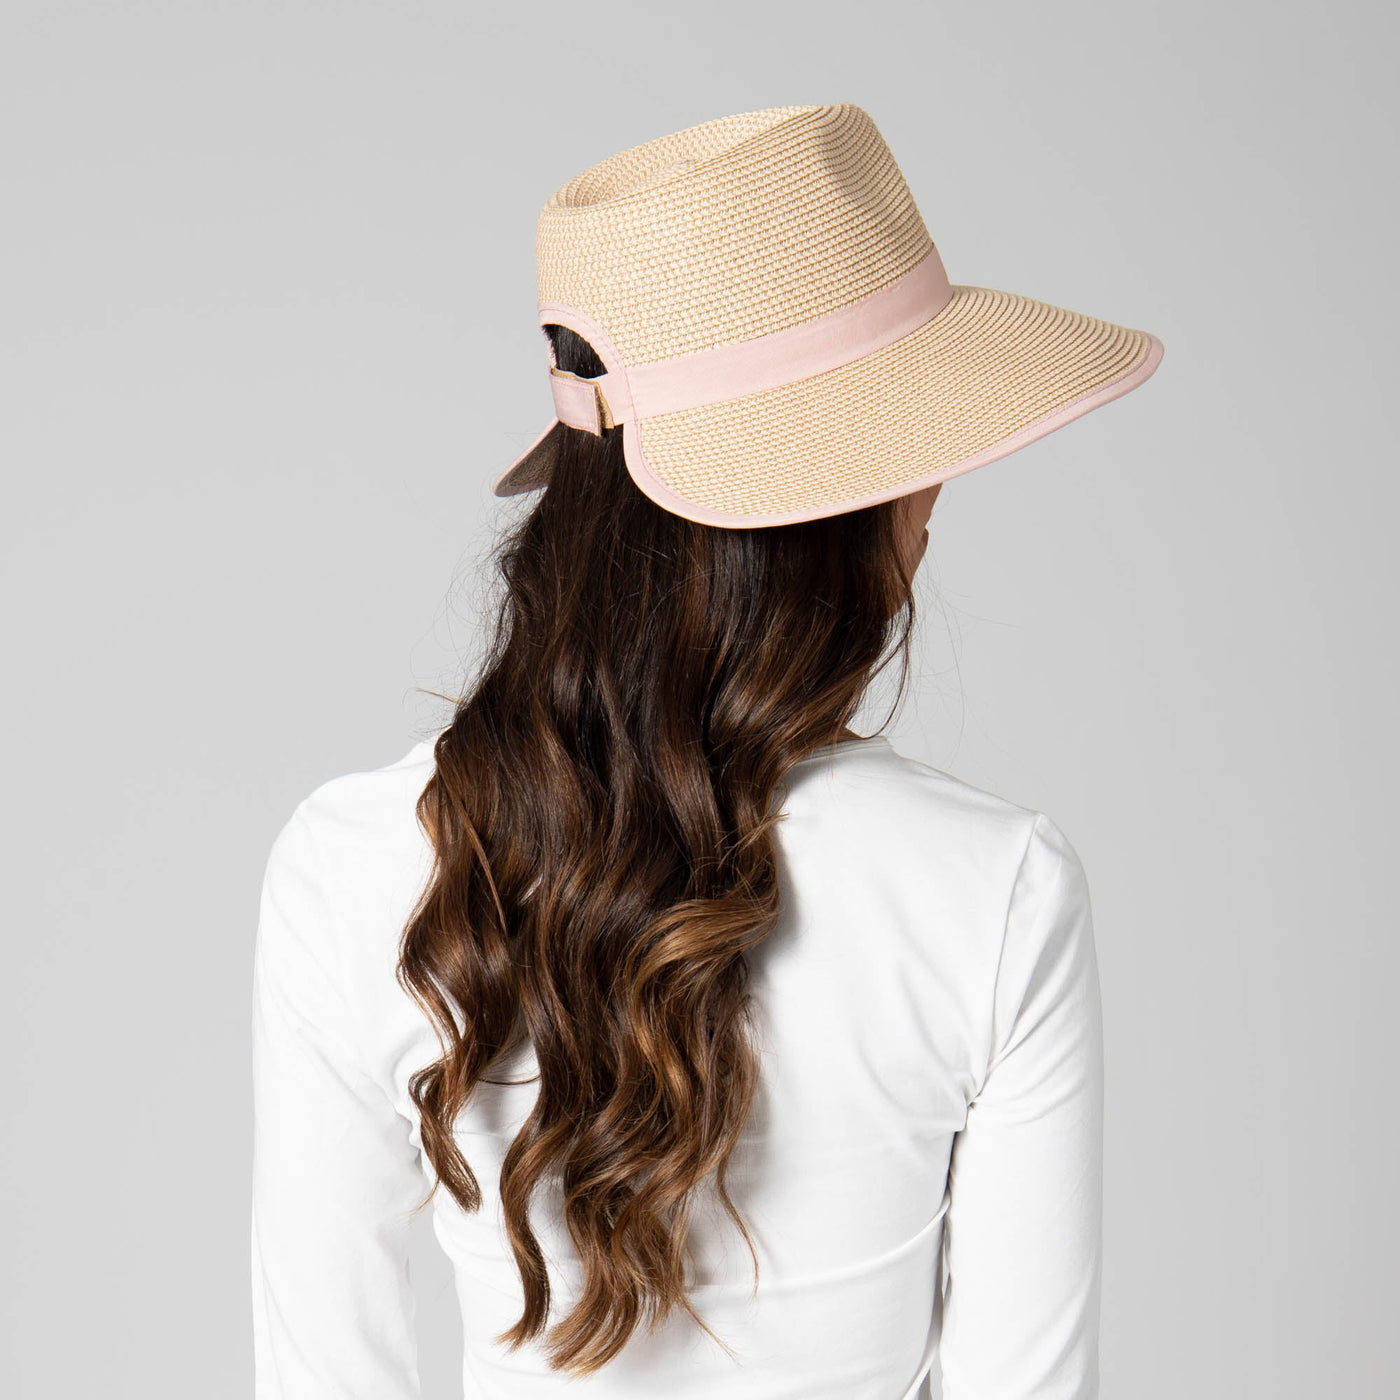 Everyday Face Saver - Women's Pinched Crown Sun Hat